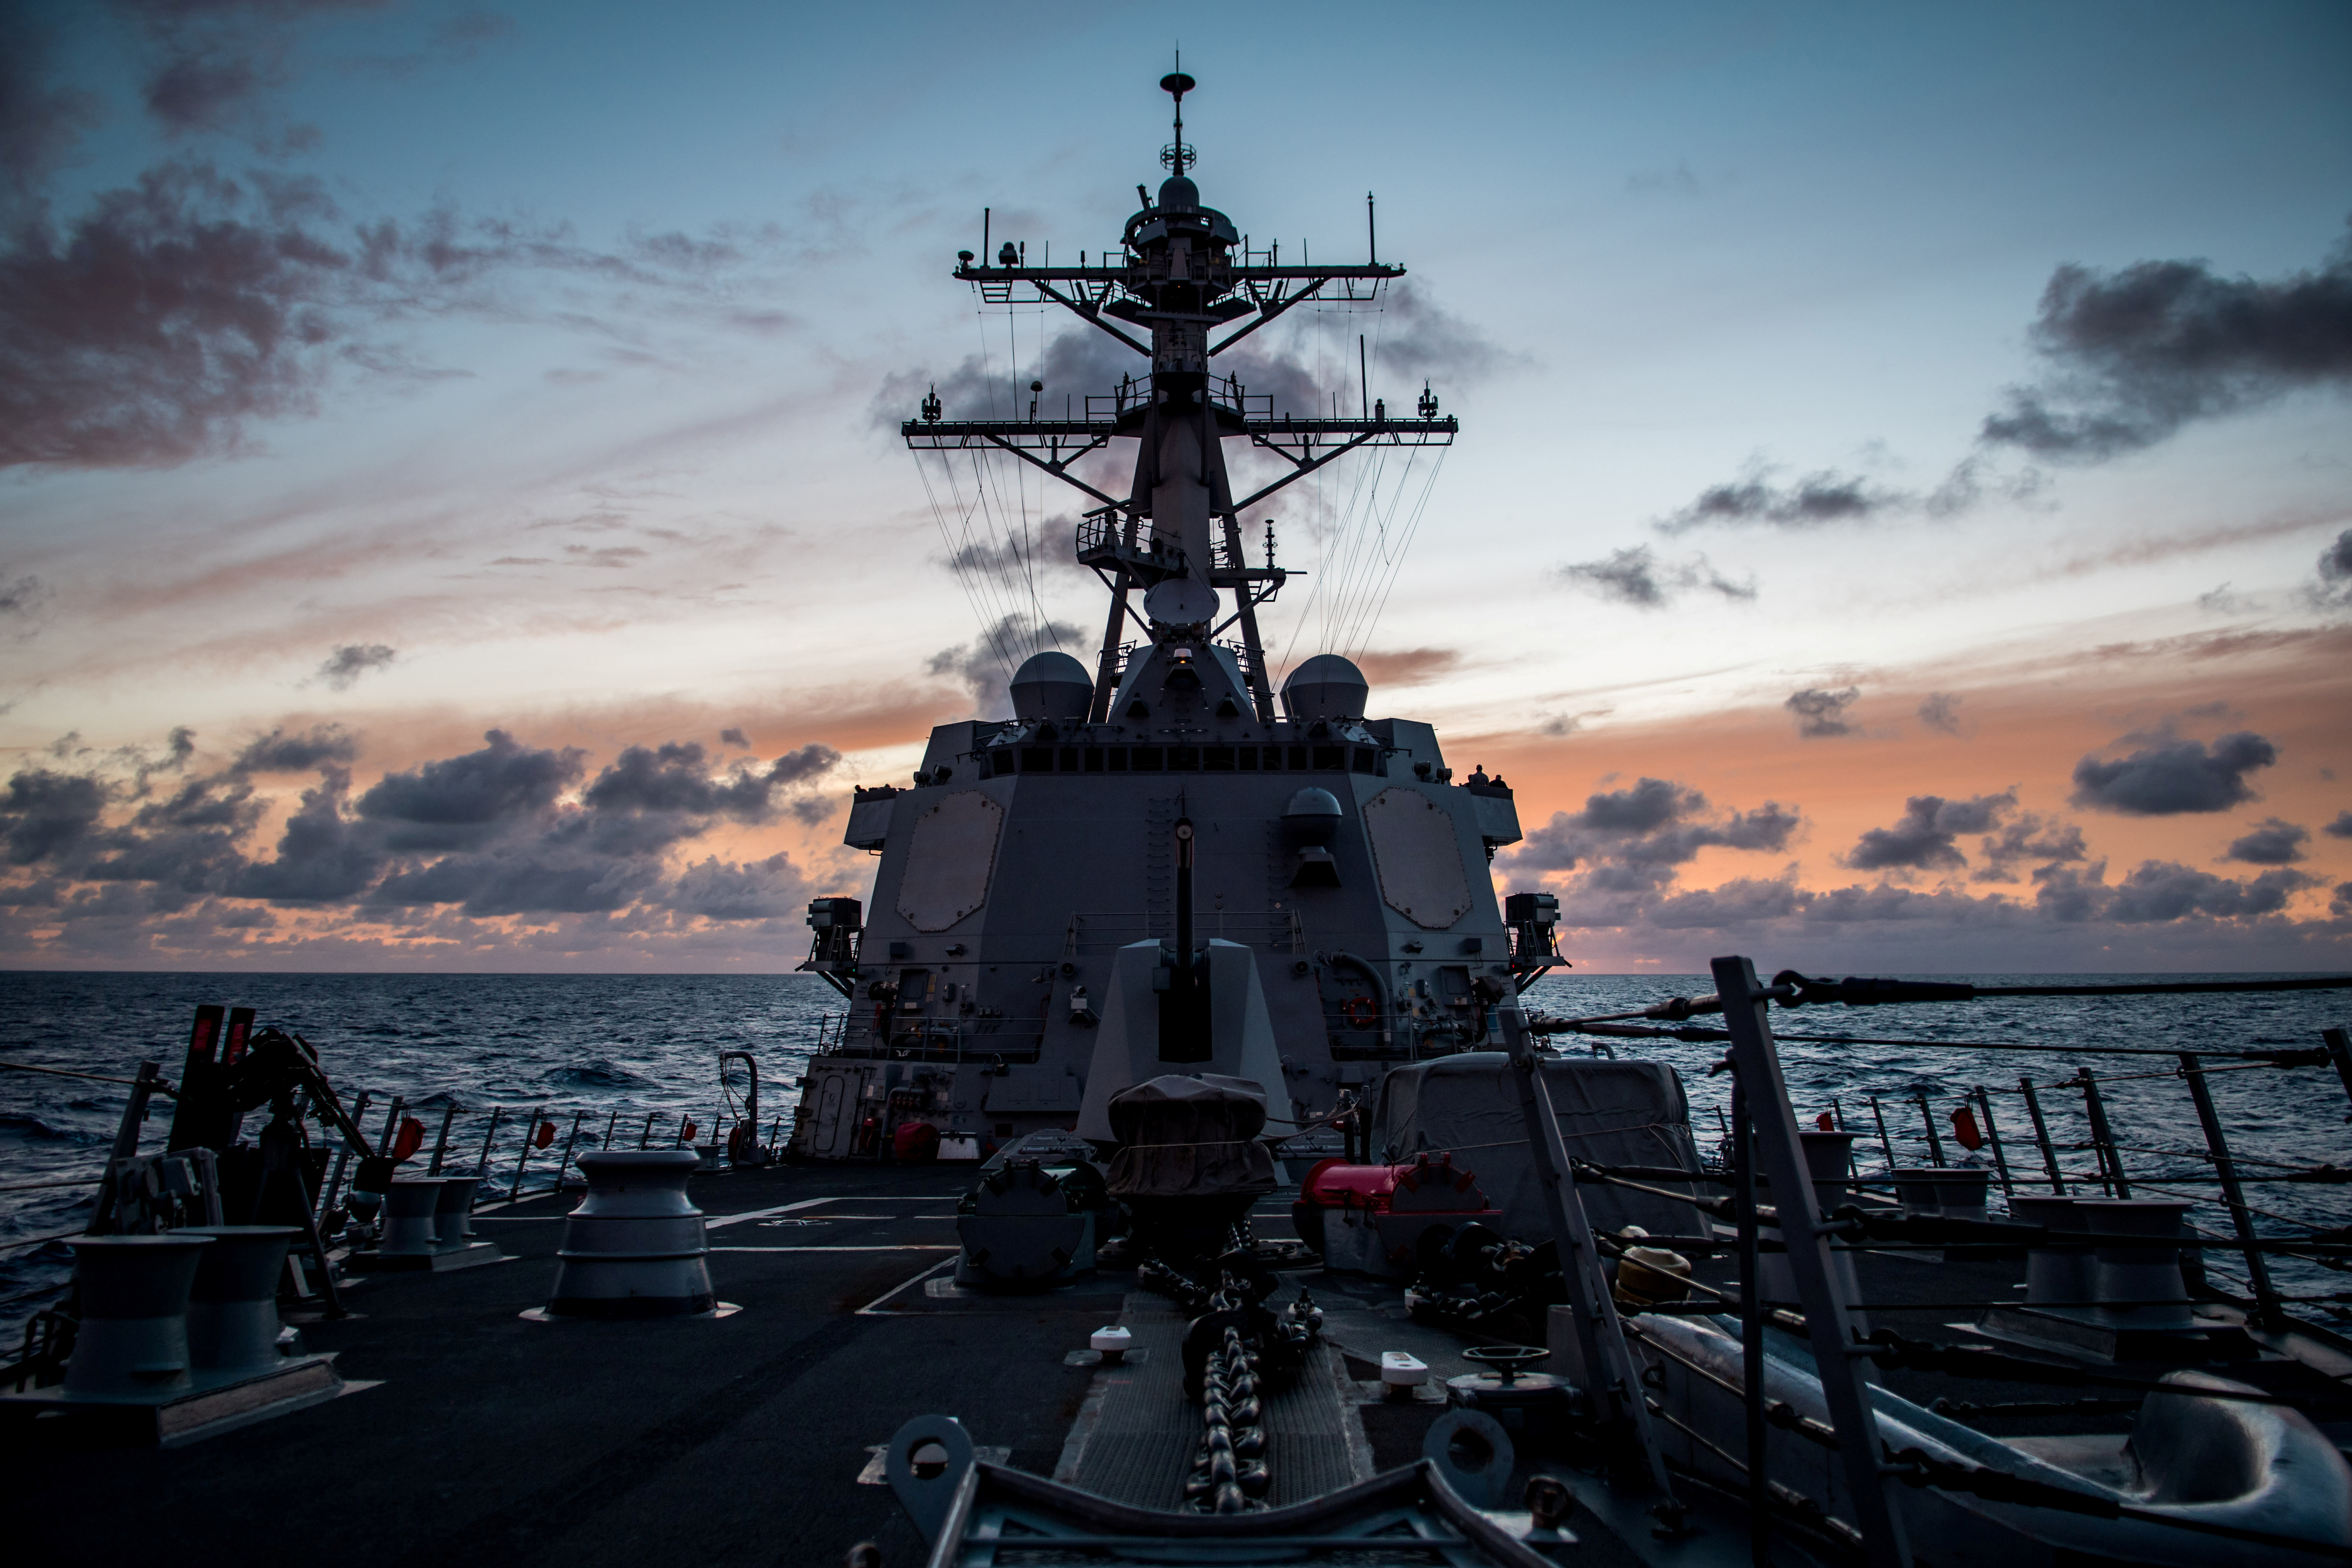 The guided-missile destroyer USS Dewey (DDG 105) transits the Pacific Ocean while participating in Rim of the Pacific (RIMPAC) exercise 2018